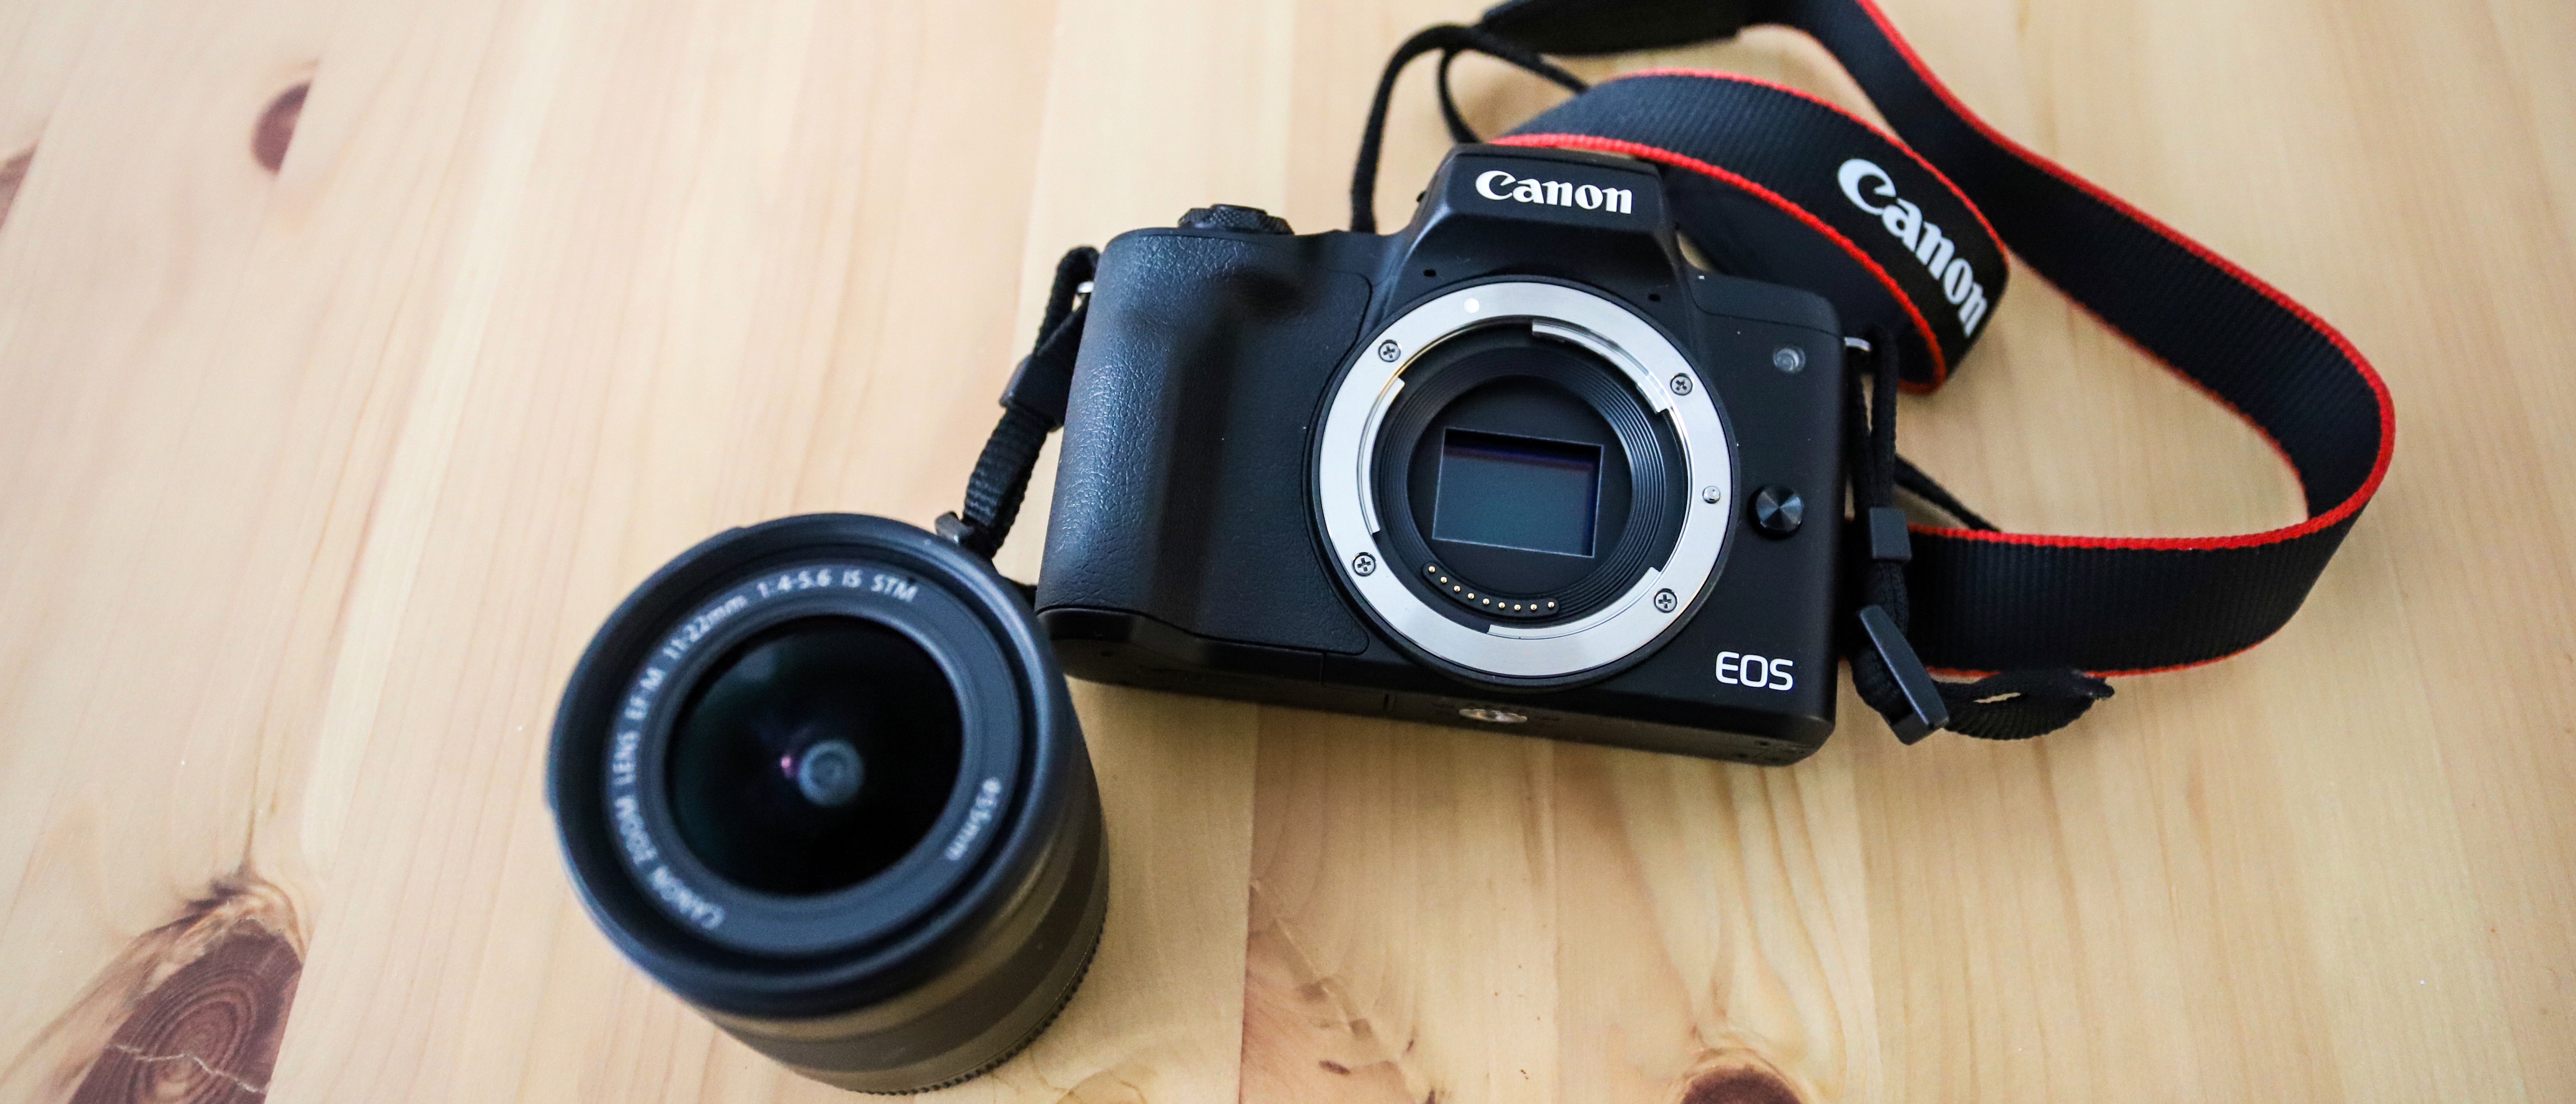 Canon EOS M50 Mark II Review 2022